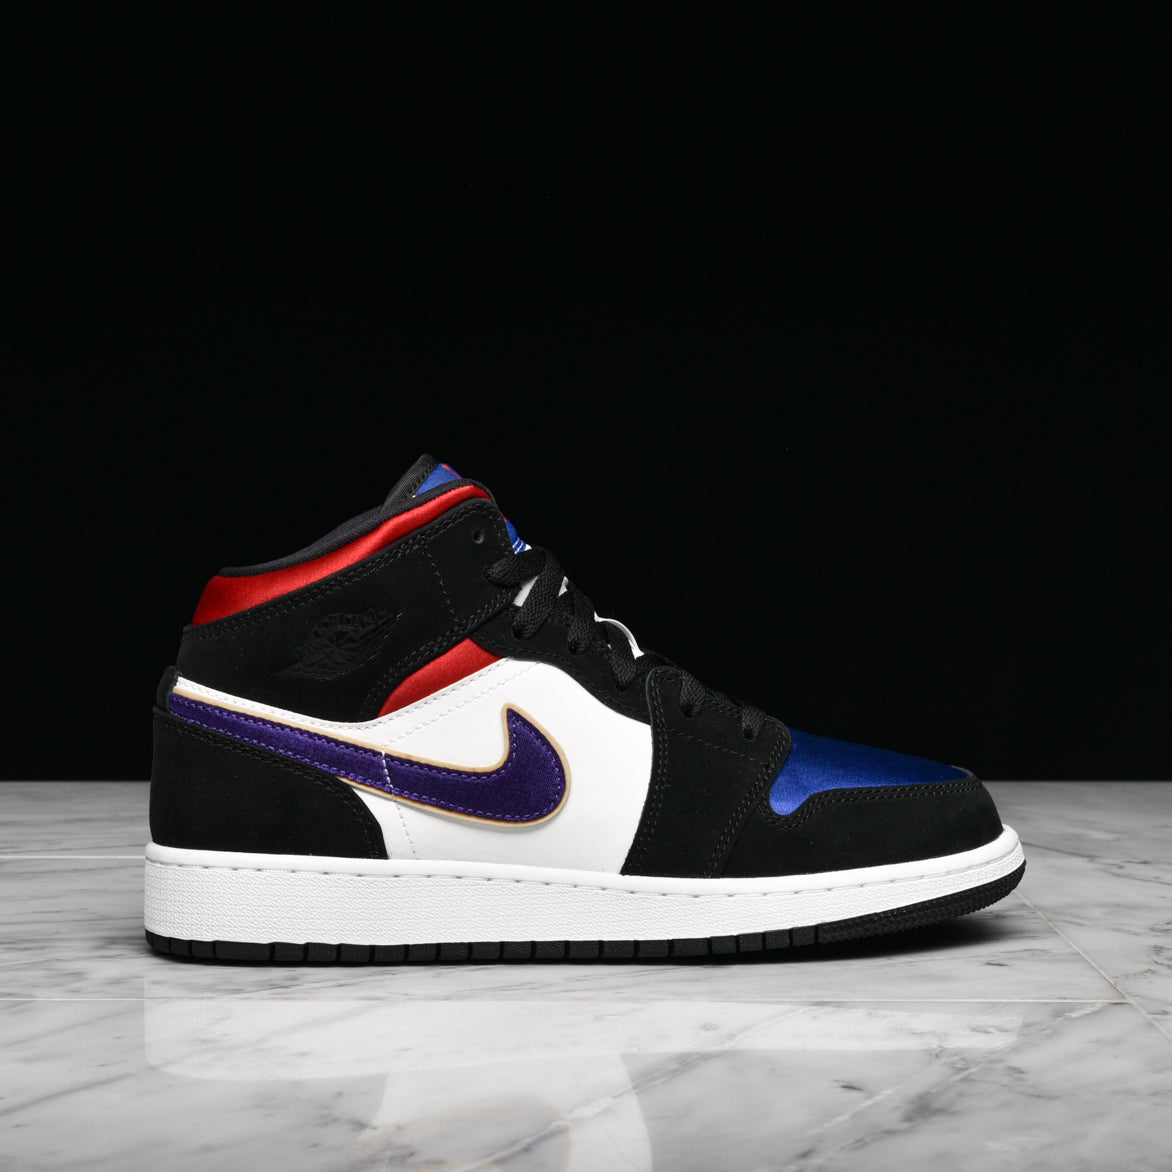 air jordan 1 mid red and blue Sale,up 